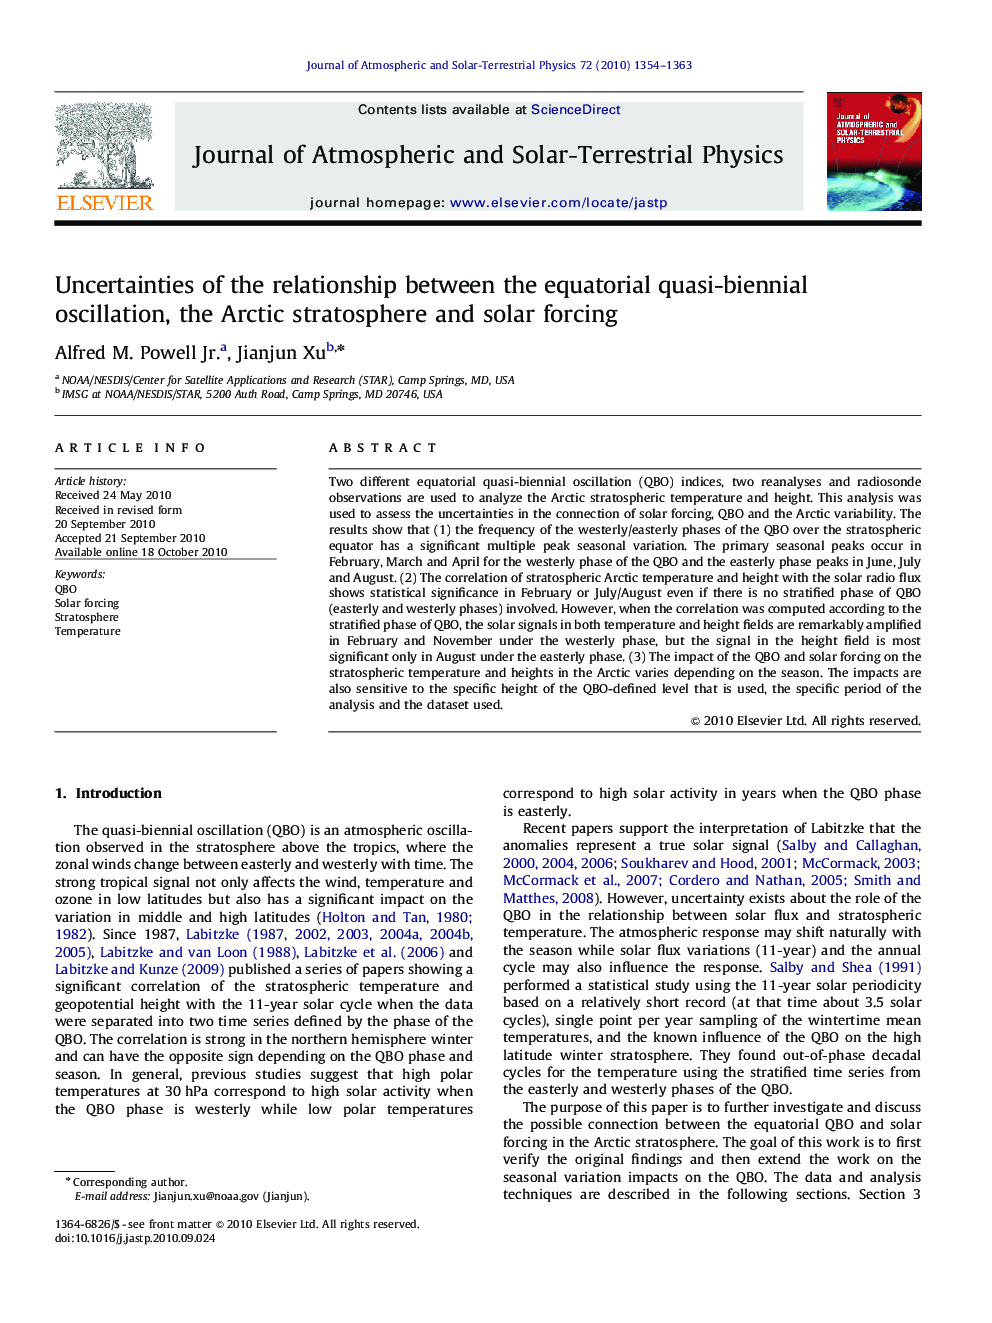 Uncertainties of the relationship between the equatorial quasi-biennial oscillation, the Arctic stratosphere and solar forcing